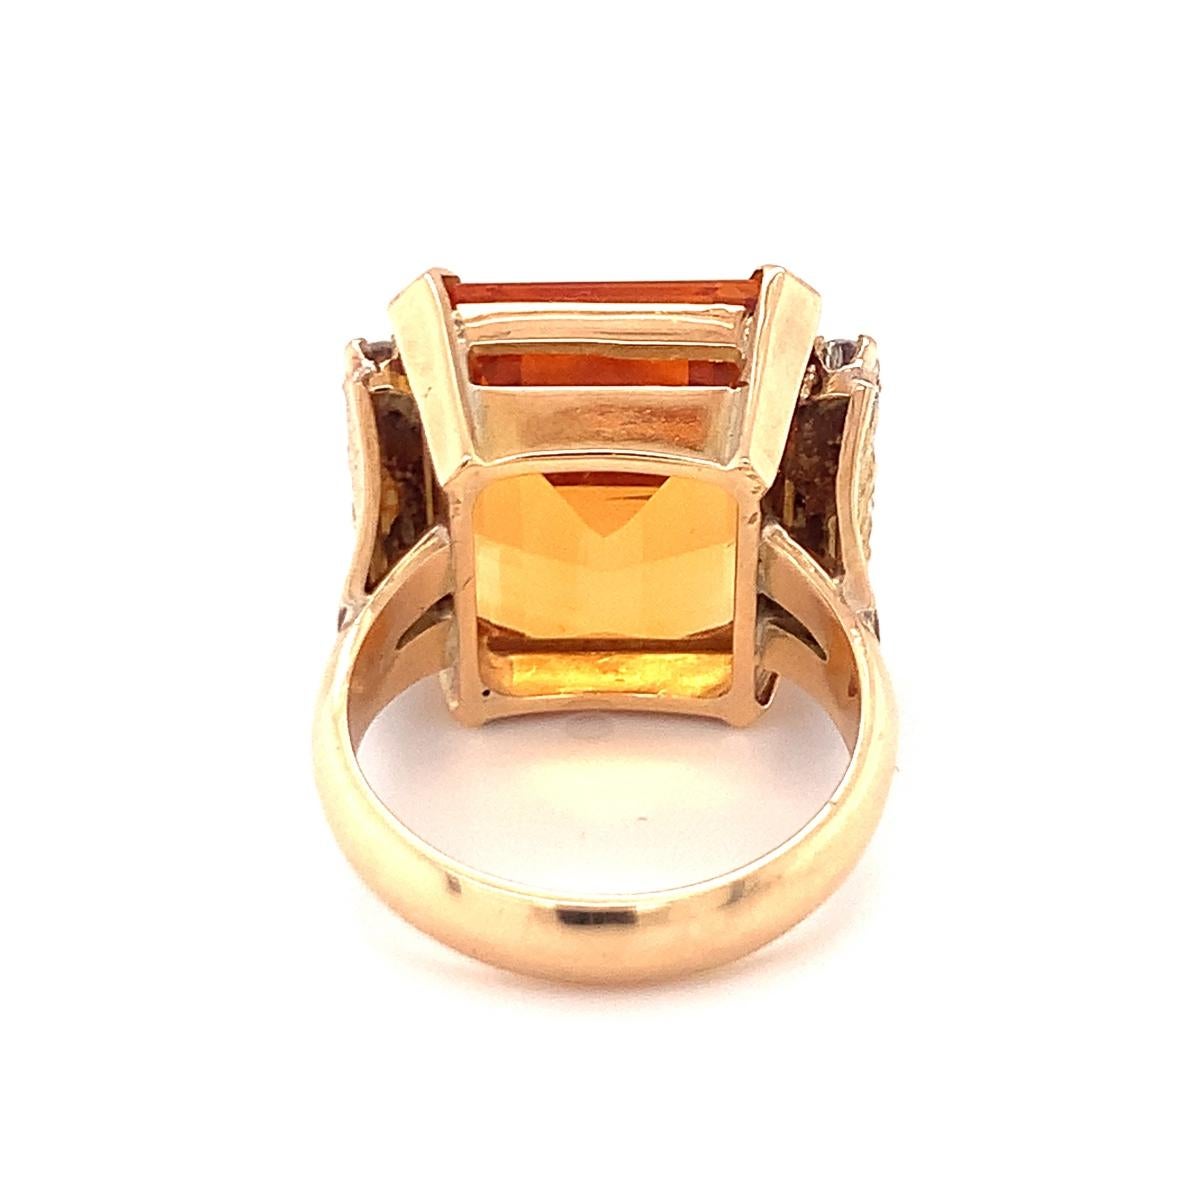 Citrine and Diamond Ring in 18K Yellow Gold, circa 1960s For Sale 1